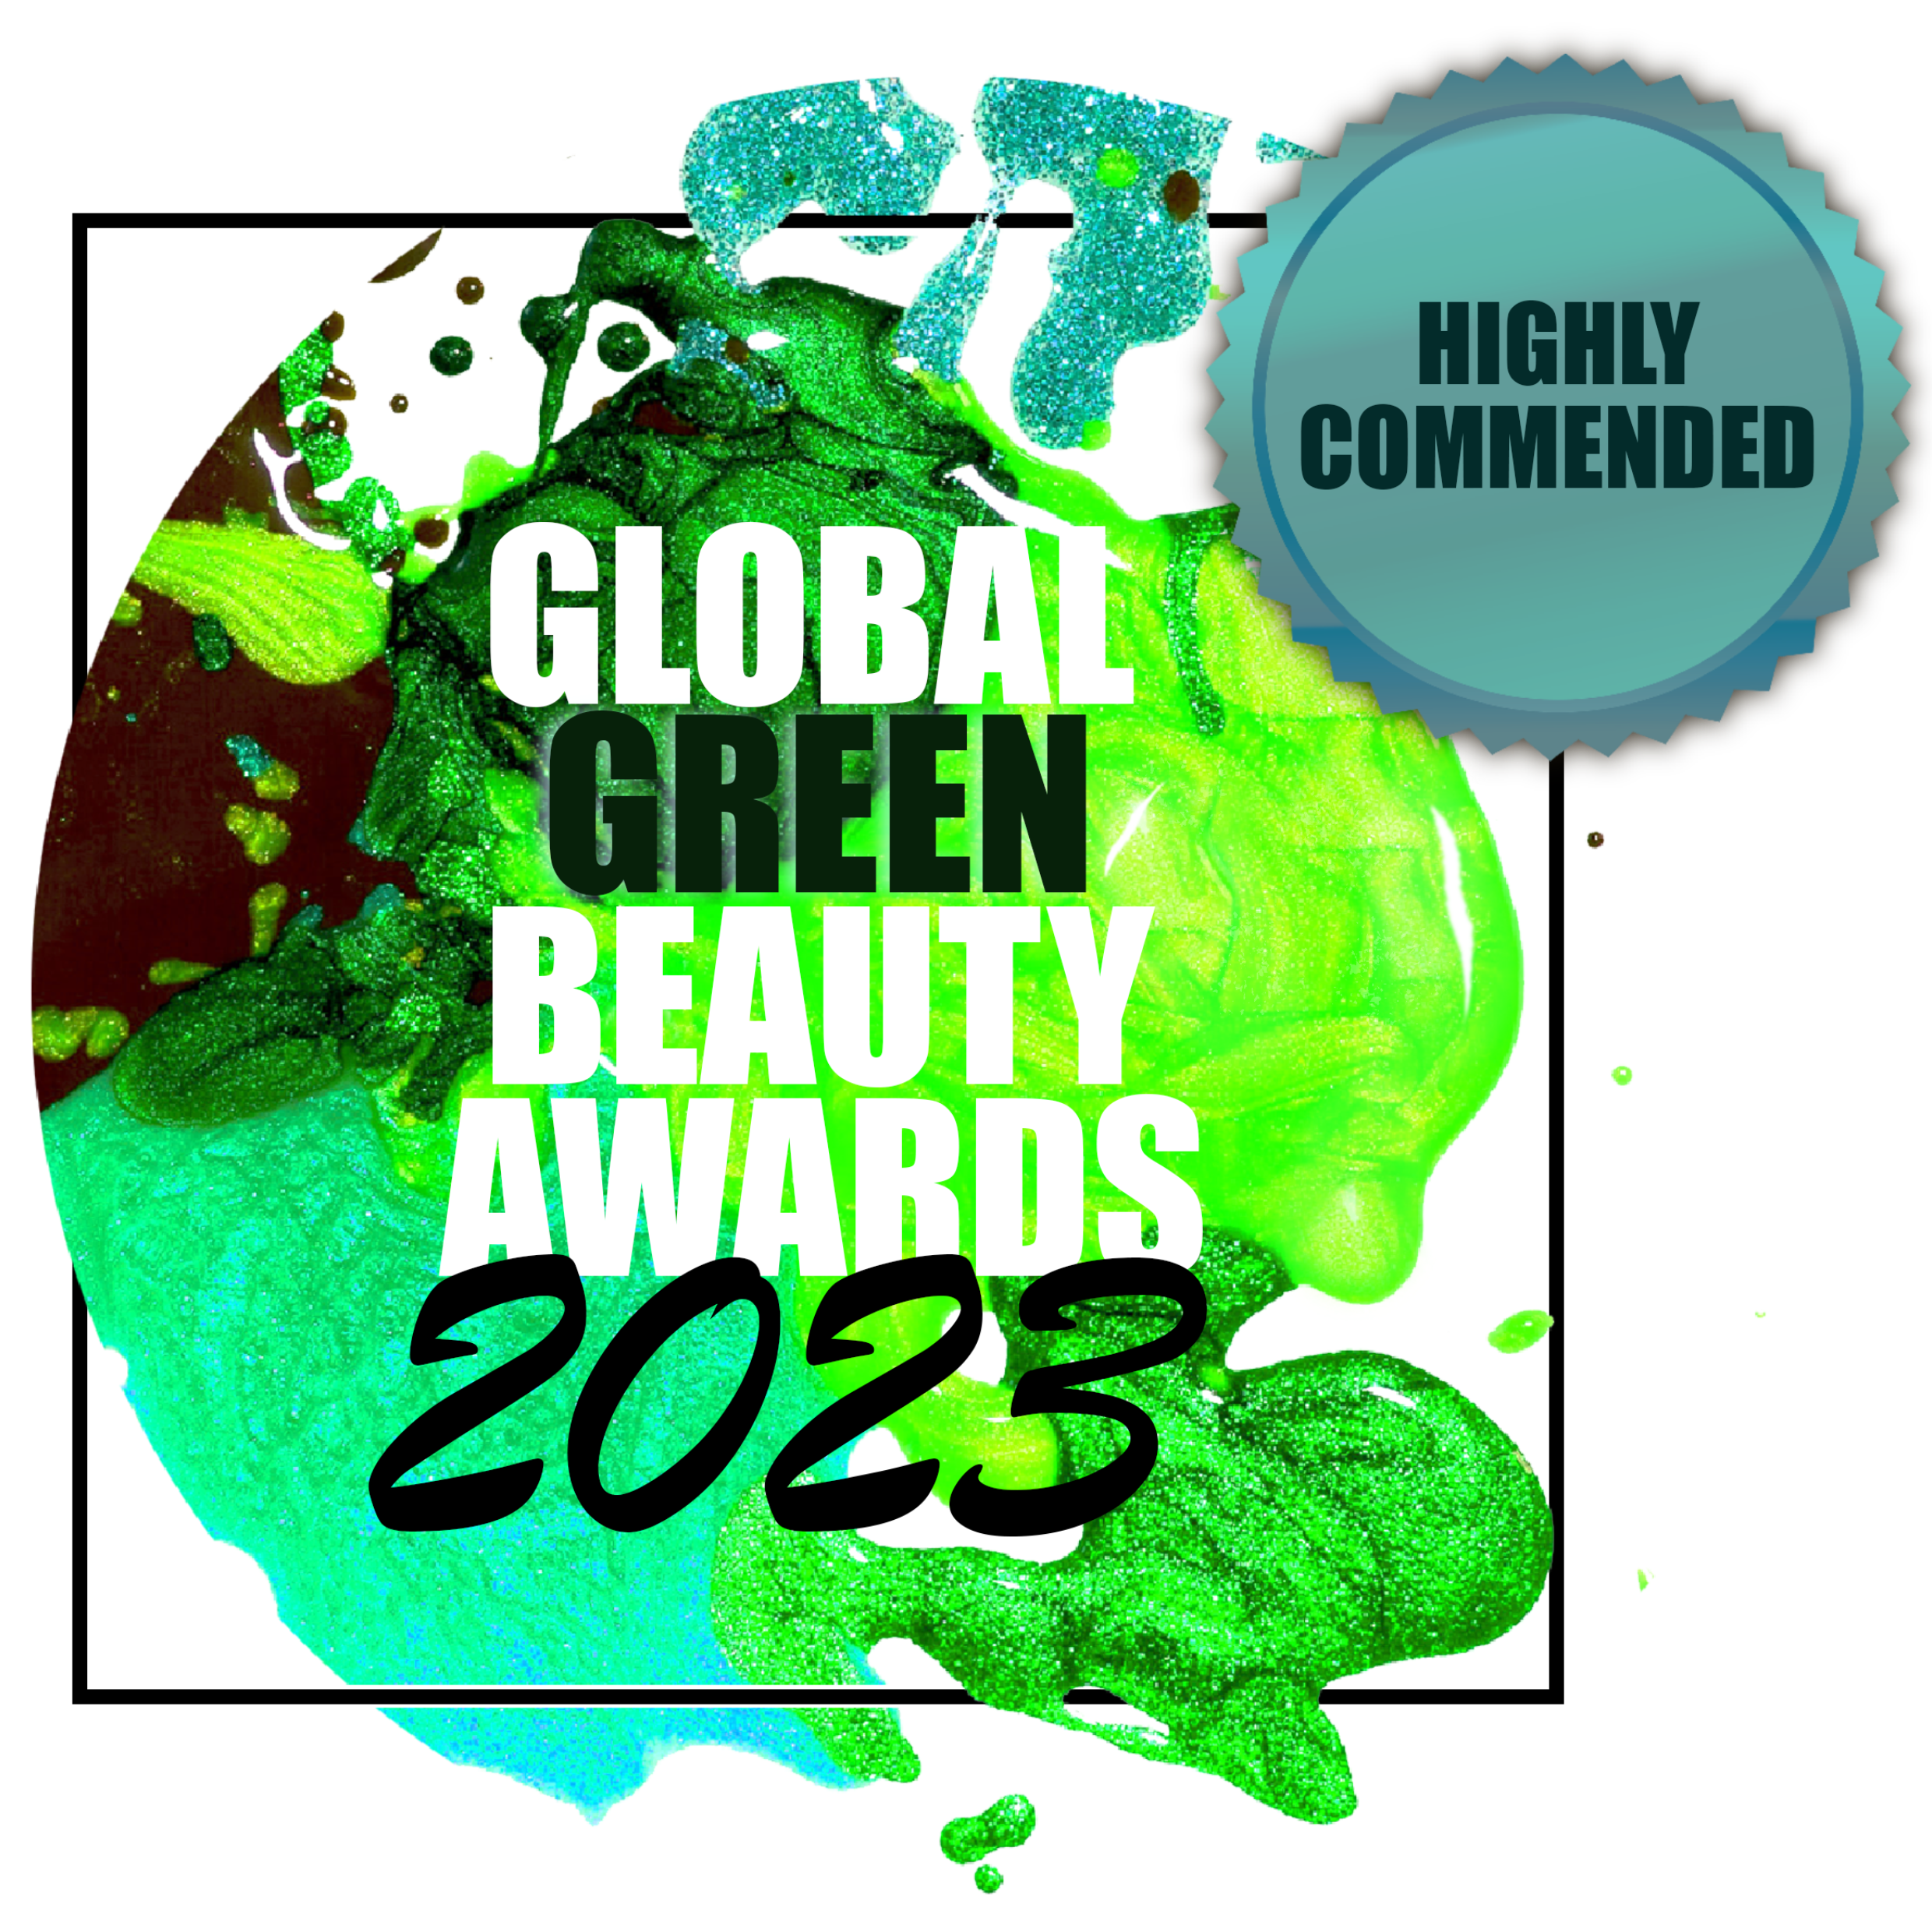 Global Green Beauty Awards 2023 Highly commended